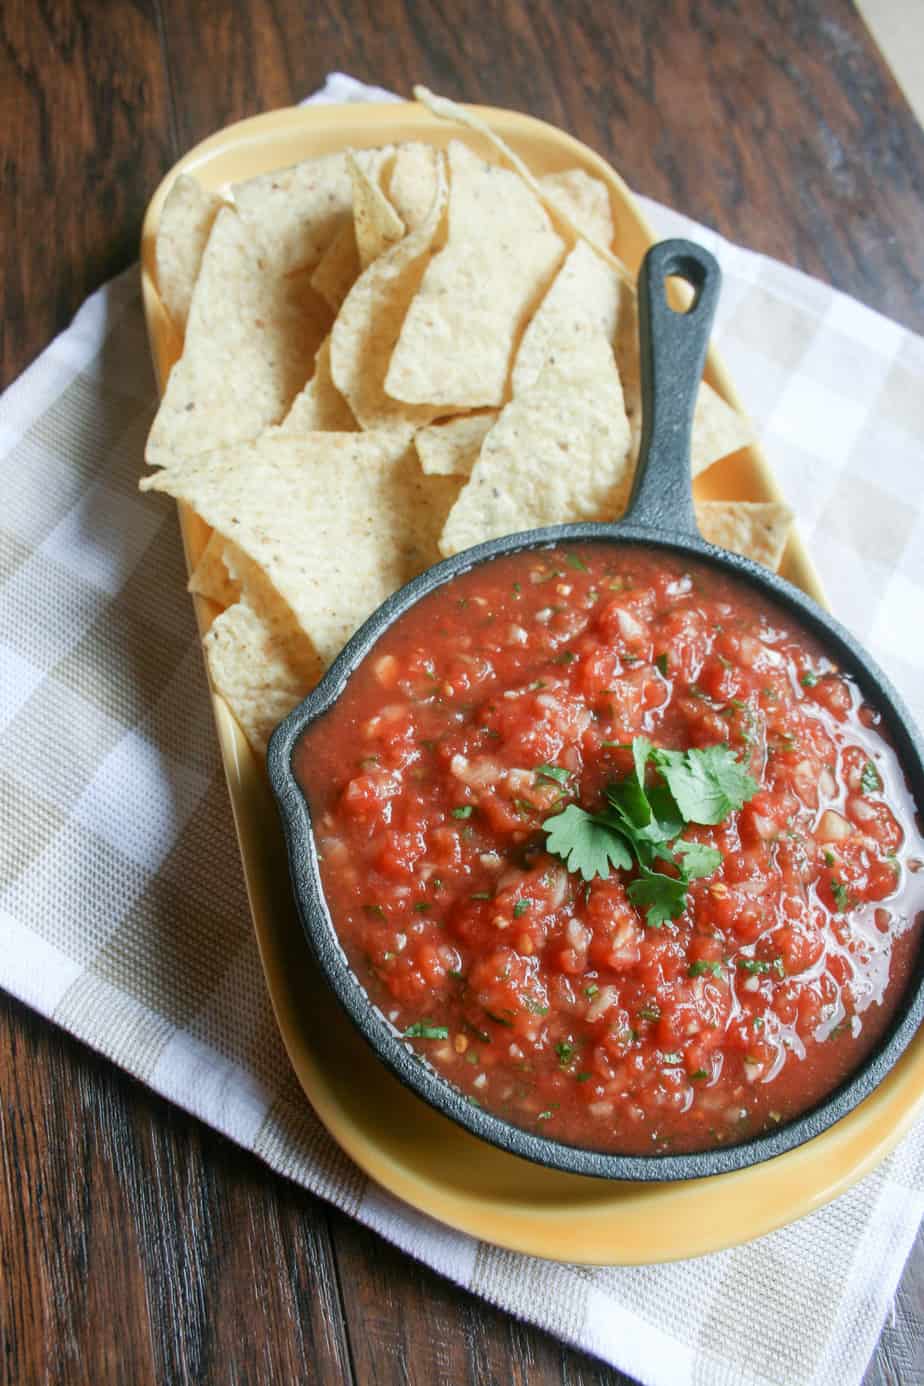 Homemade Mexican Restaurant Style Salsa is the greatest appetizer for Taco Tuesday or any other party or get together!